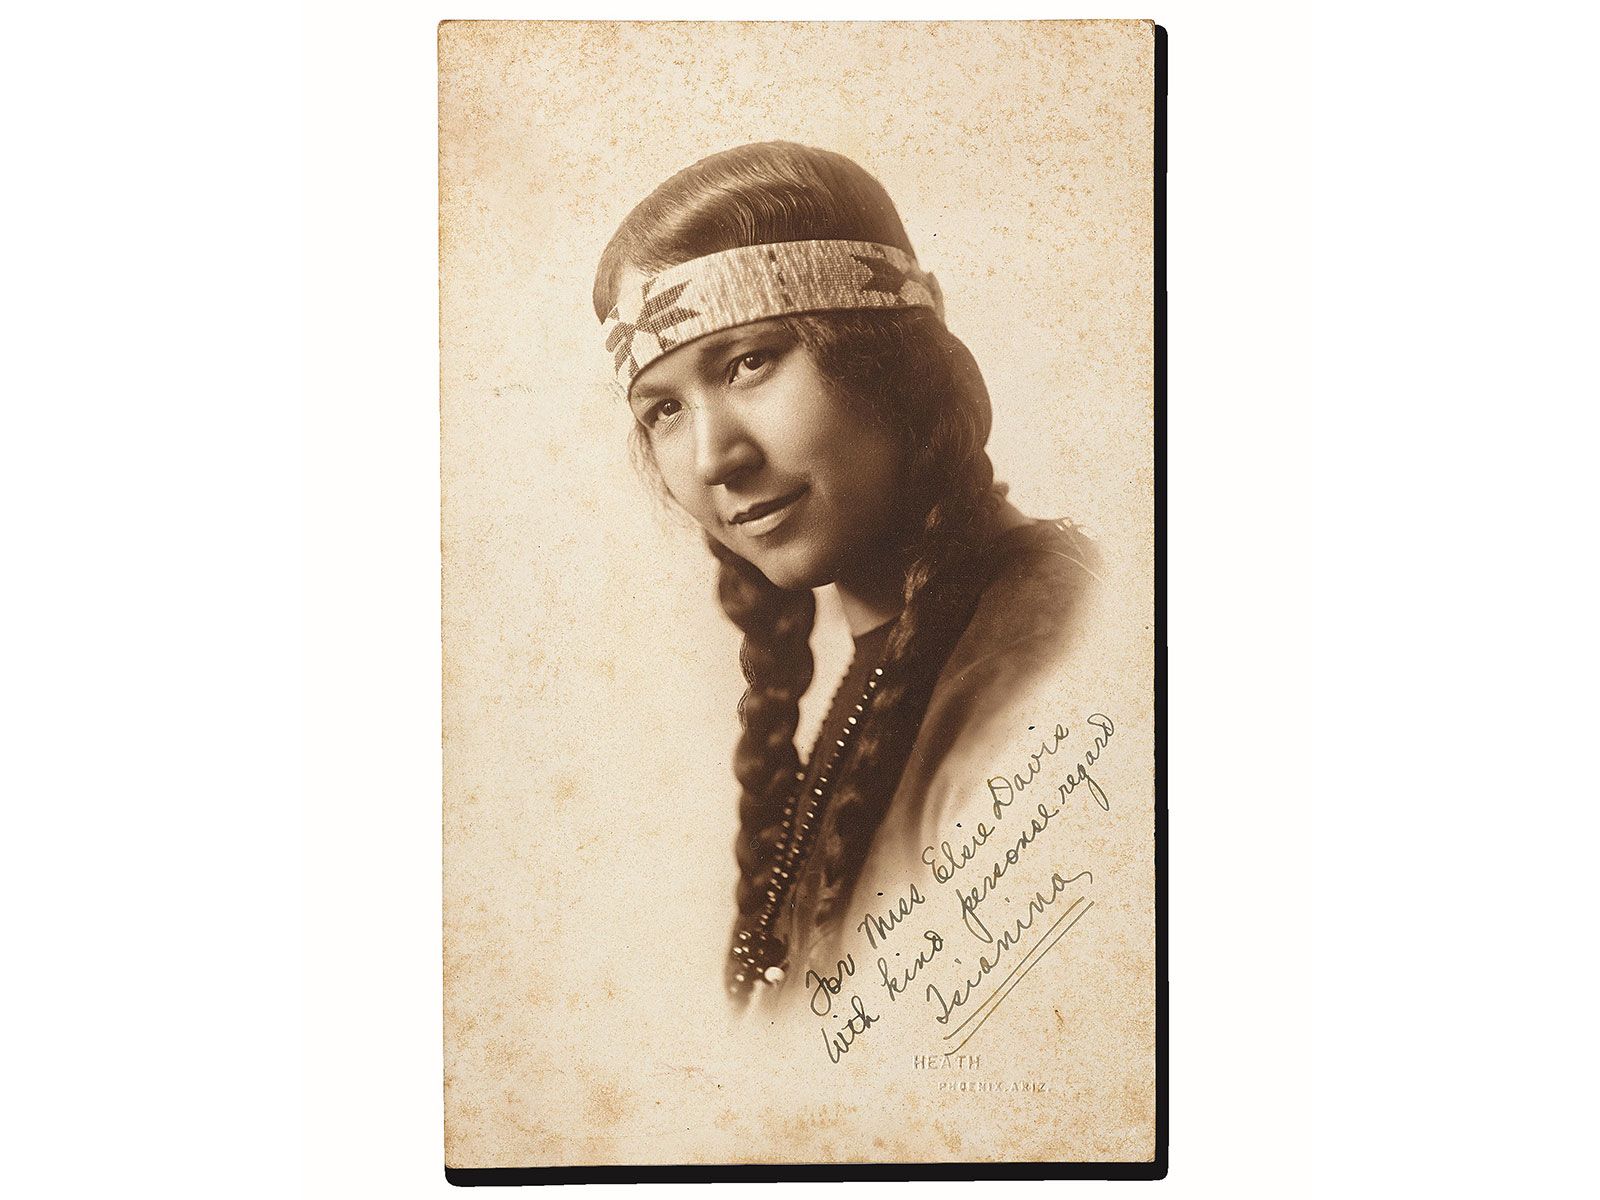 The Forgotten History of Tsianina Redfeather, the Beloved American Indian Opera Singer